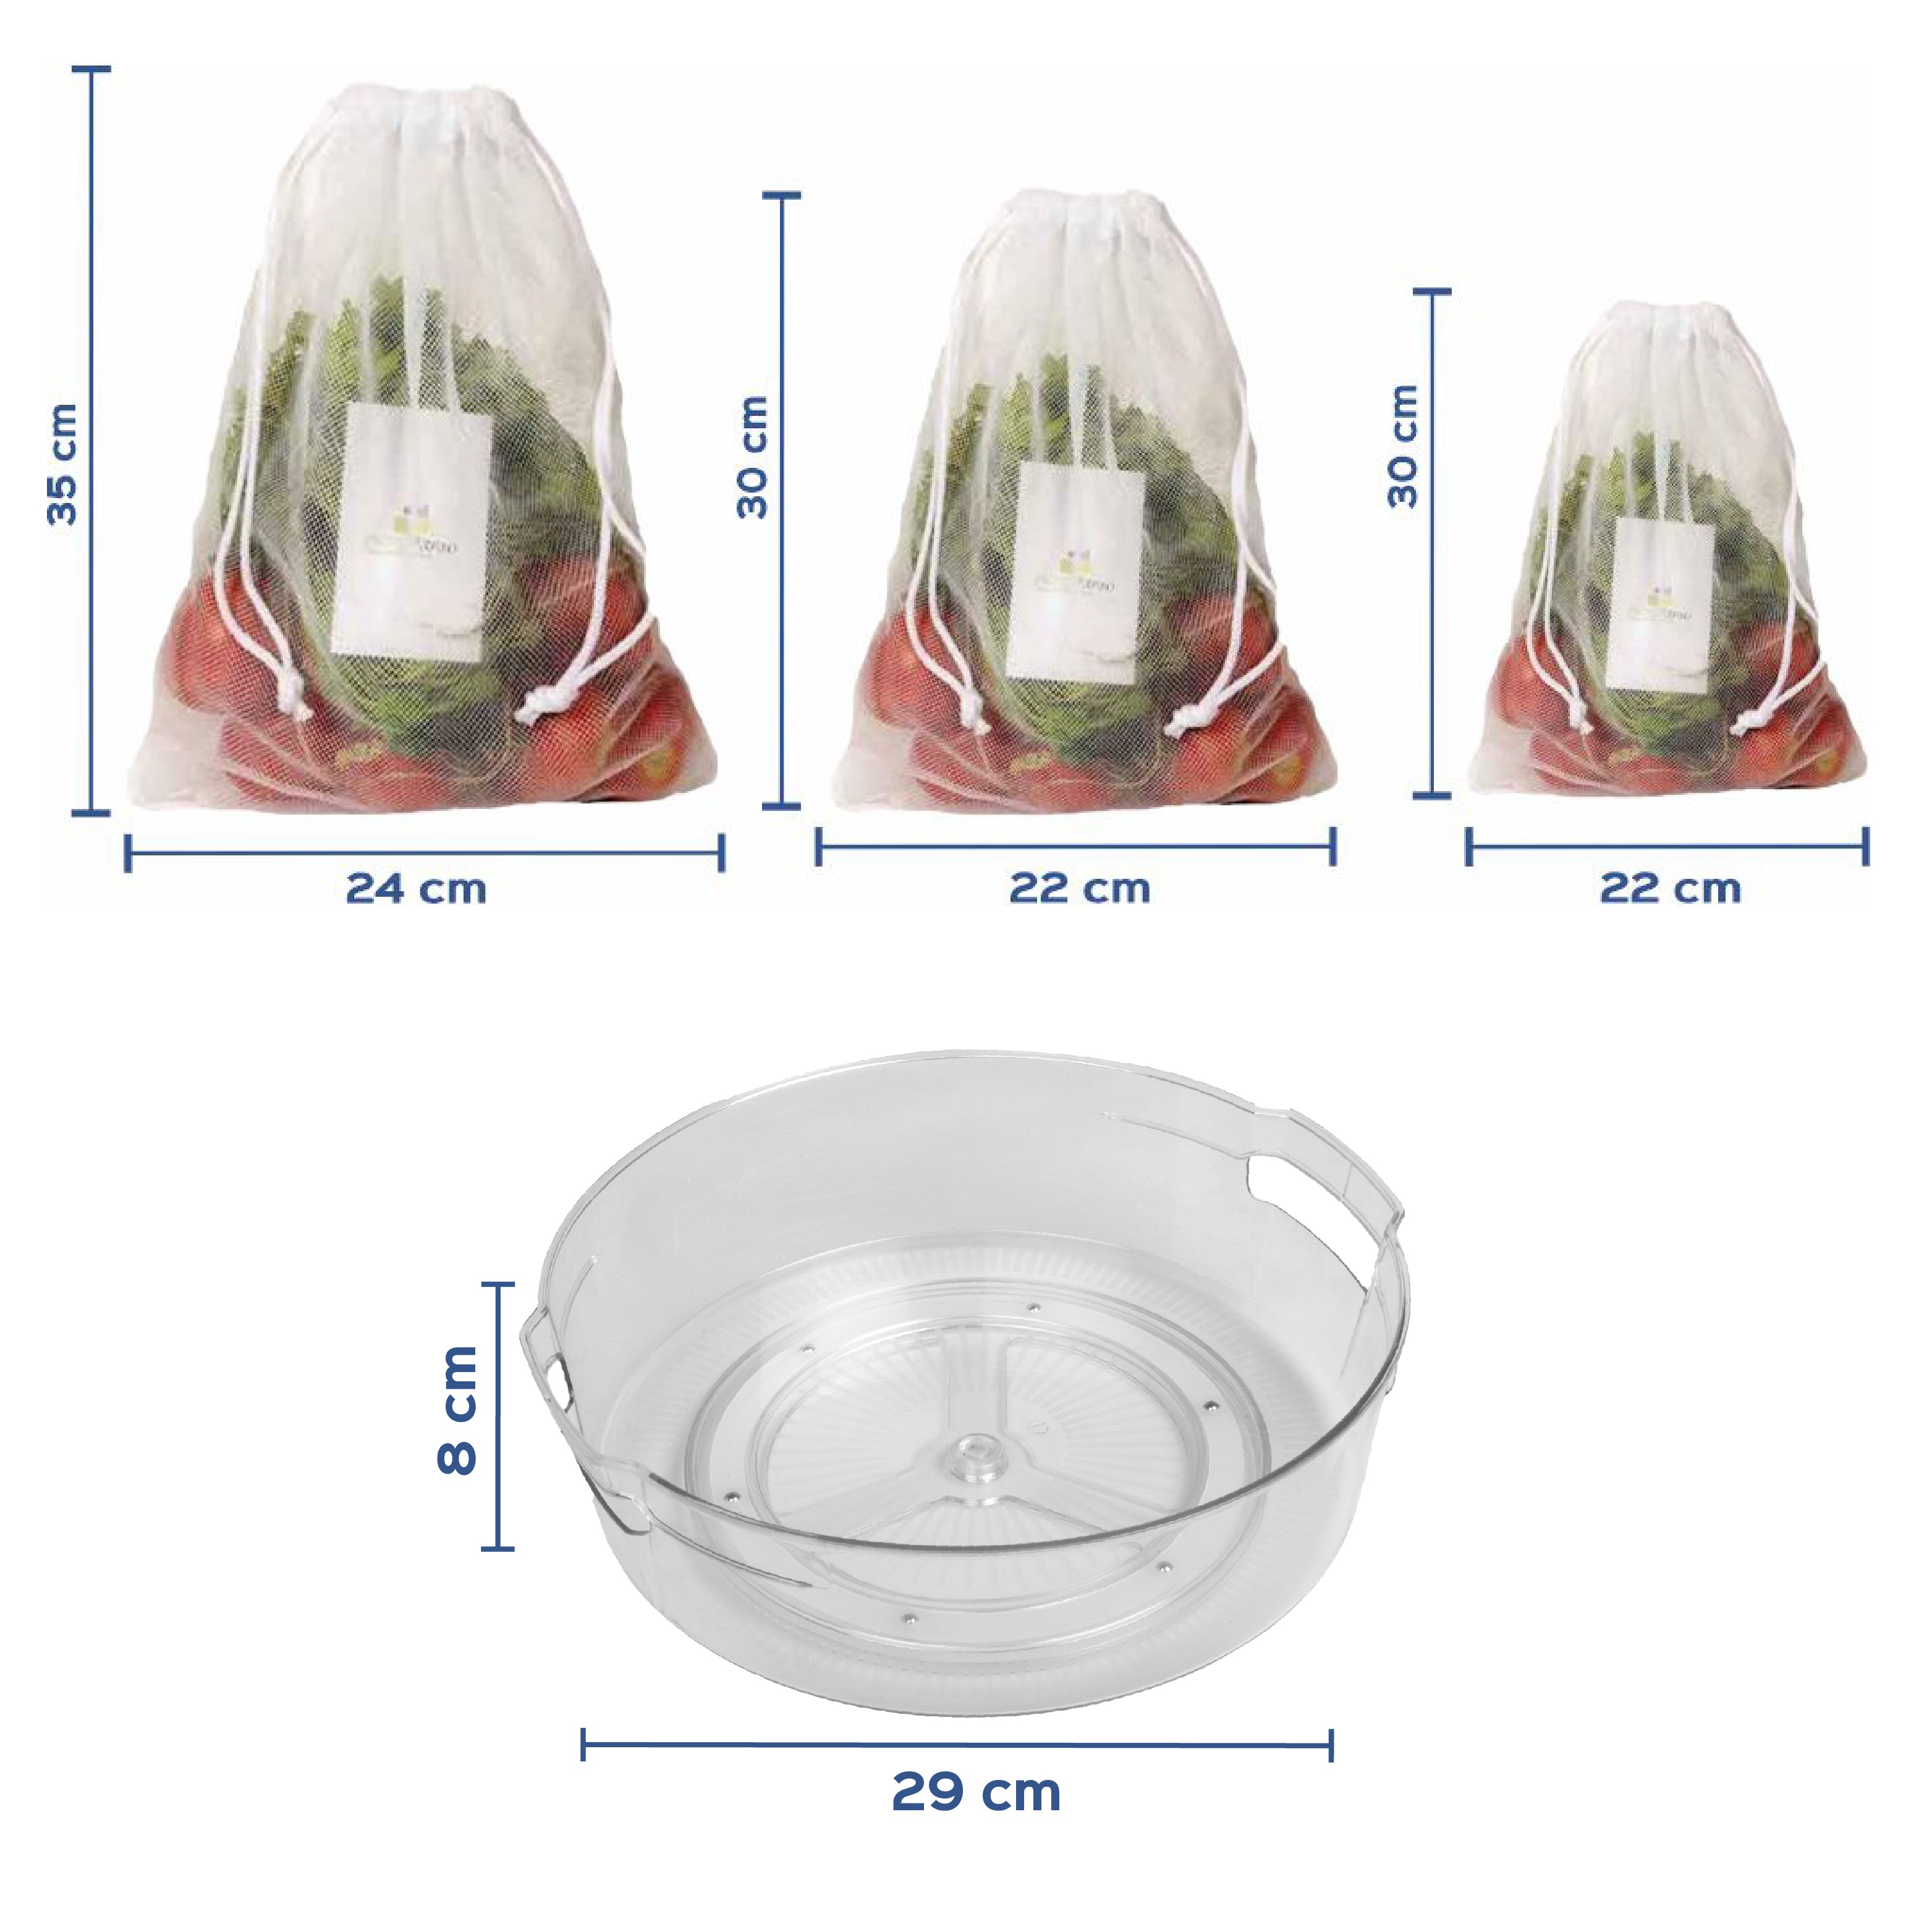 Combo of 1pc of 360° Rotating Multipurpose tray, 12pcs of  Vegetable & Fruits Storing Bags and 1pc of 2 Tier Space Saver Plastic Storage Basket